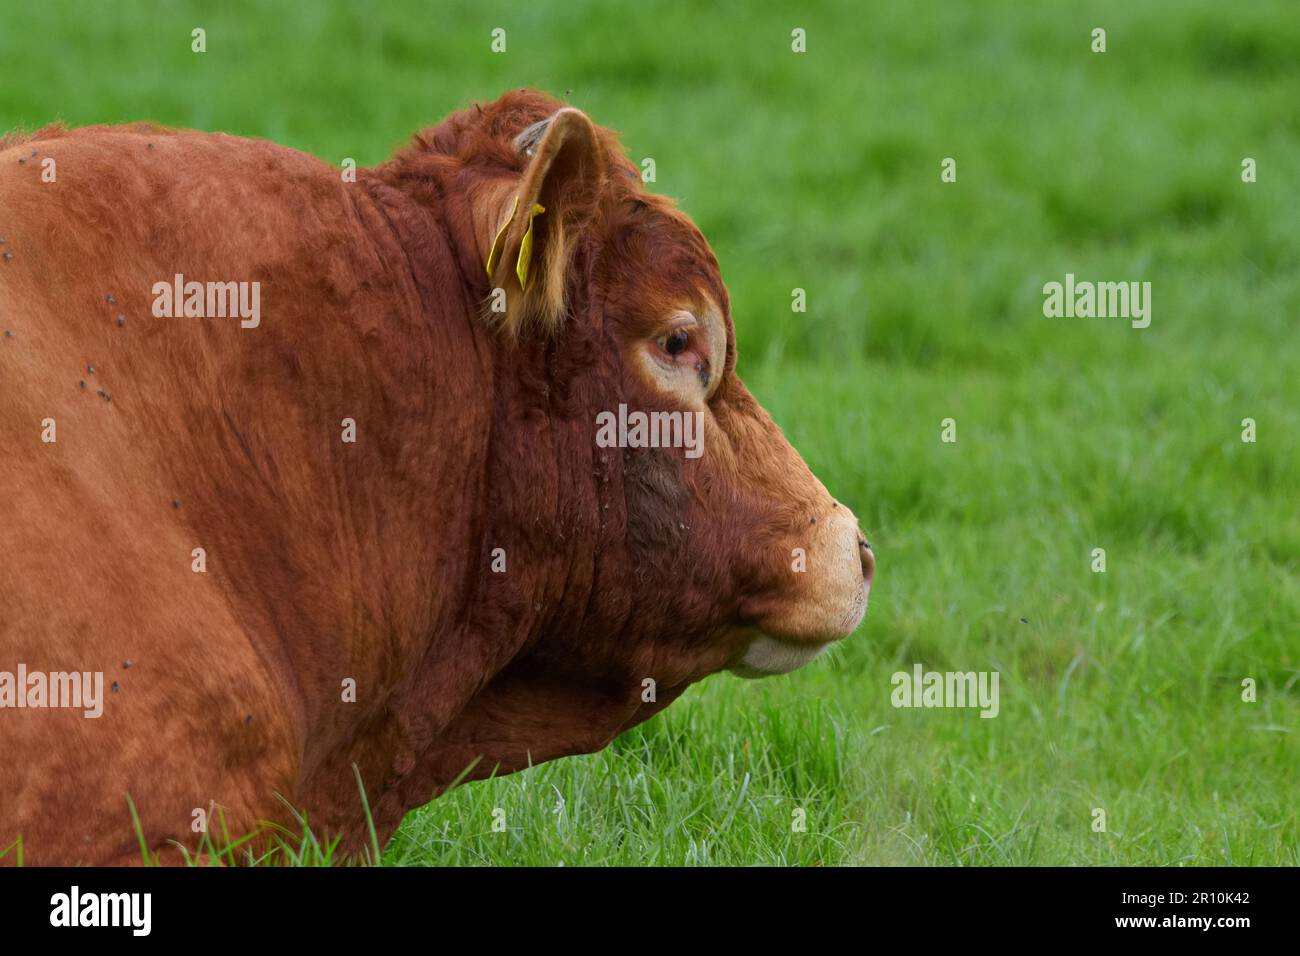 Portrait of a magnificent brown bull with a thick neck grazing in a field of grass. Food production. Livestock farming. Stock Photo